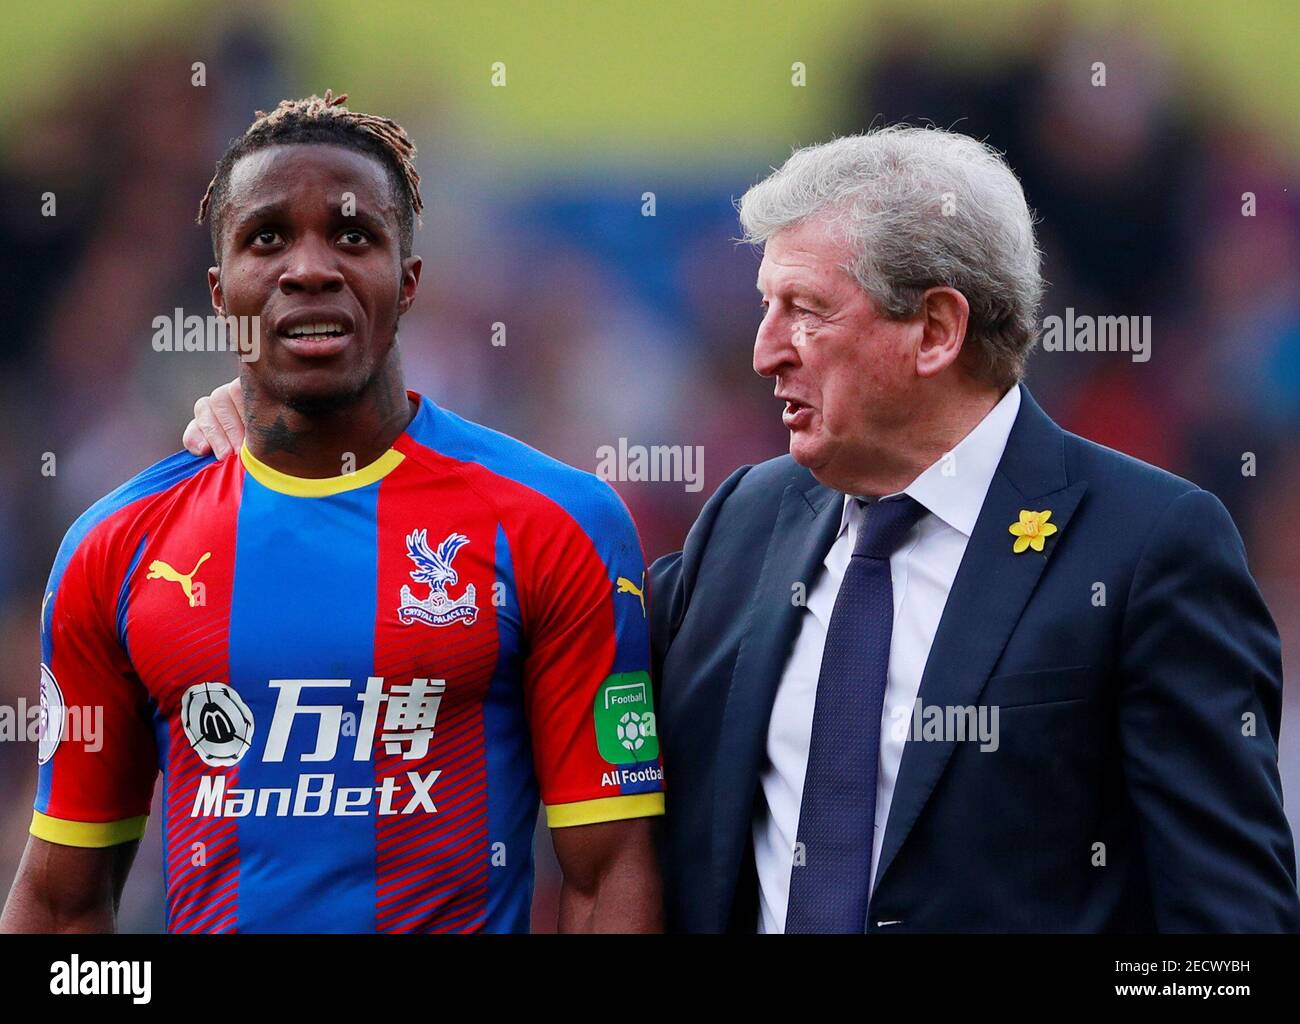 Soccer Football - Premier League - Crystal Palace v Huddersfield Town - Selhurst Park, London, Britain - March 30, 2019  Crystal Palace's Wilfried Zaha with manager Roy Hodgson after the match    Action Images via Reuters/Andrew Couldridge  EDITORIAL USE ONLY. No use with unauthorized audio, video, data, fixture lists, club/league logos or 'live' services. Online in-match use limited to 75 images, no video emulation. No use in betting, games or single club/league/player publications.  Please contact your account representative for further details. Stock Photo